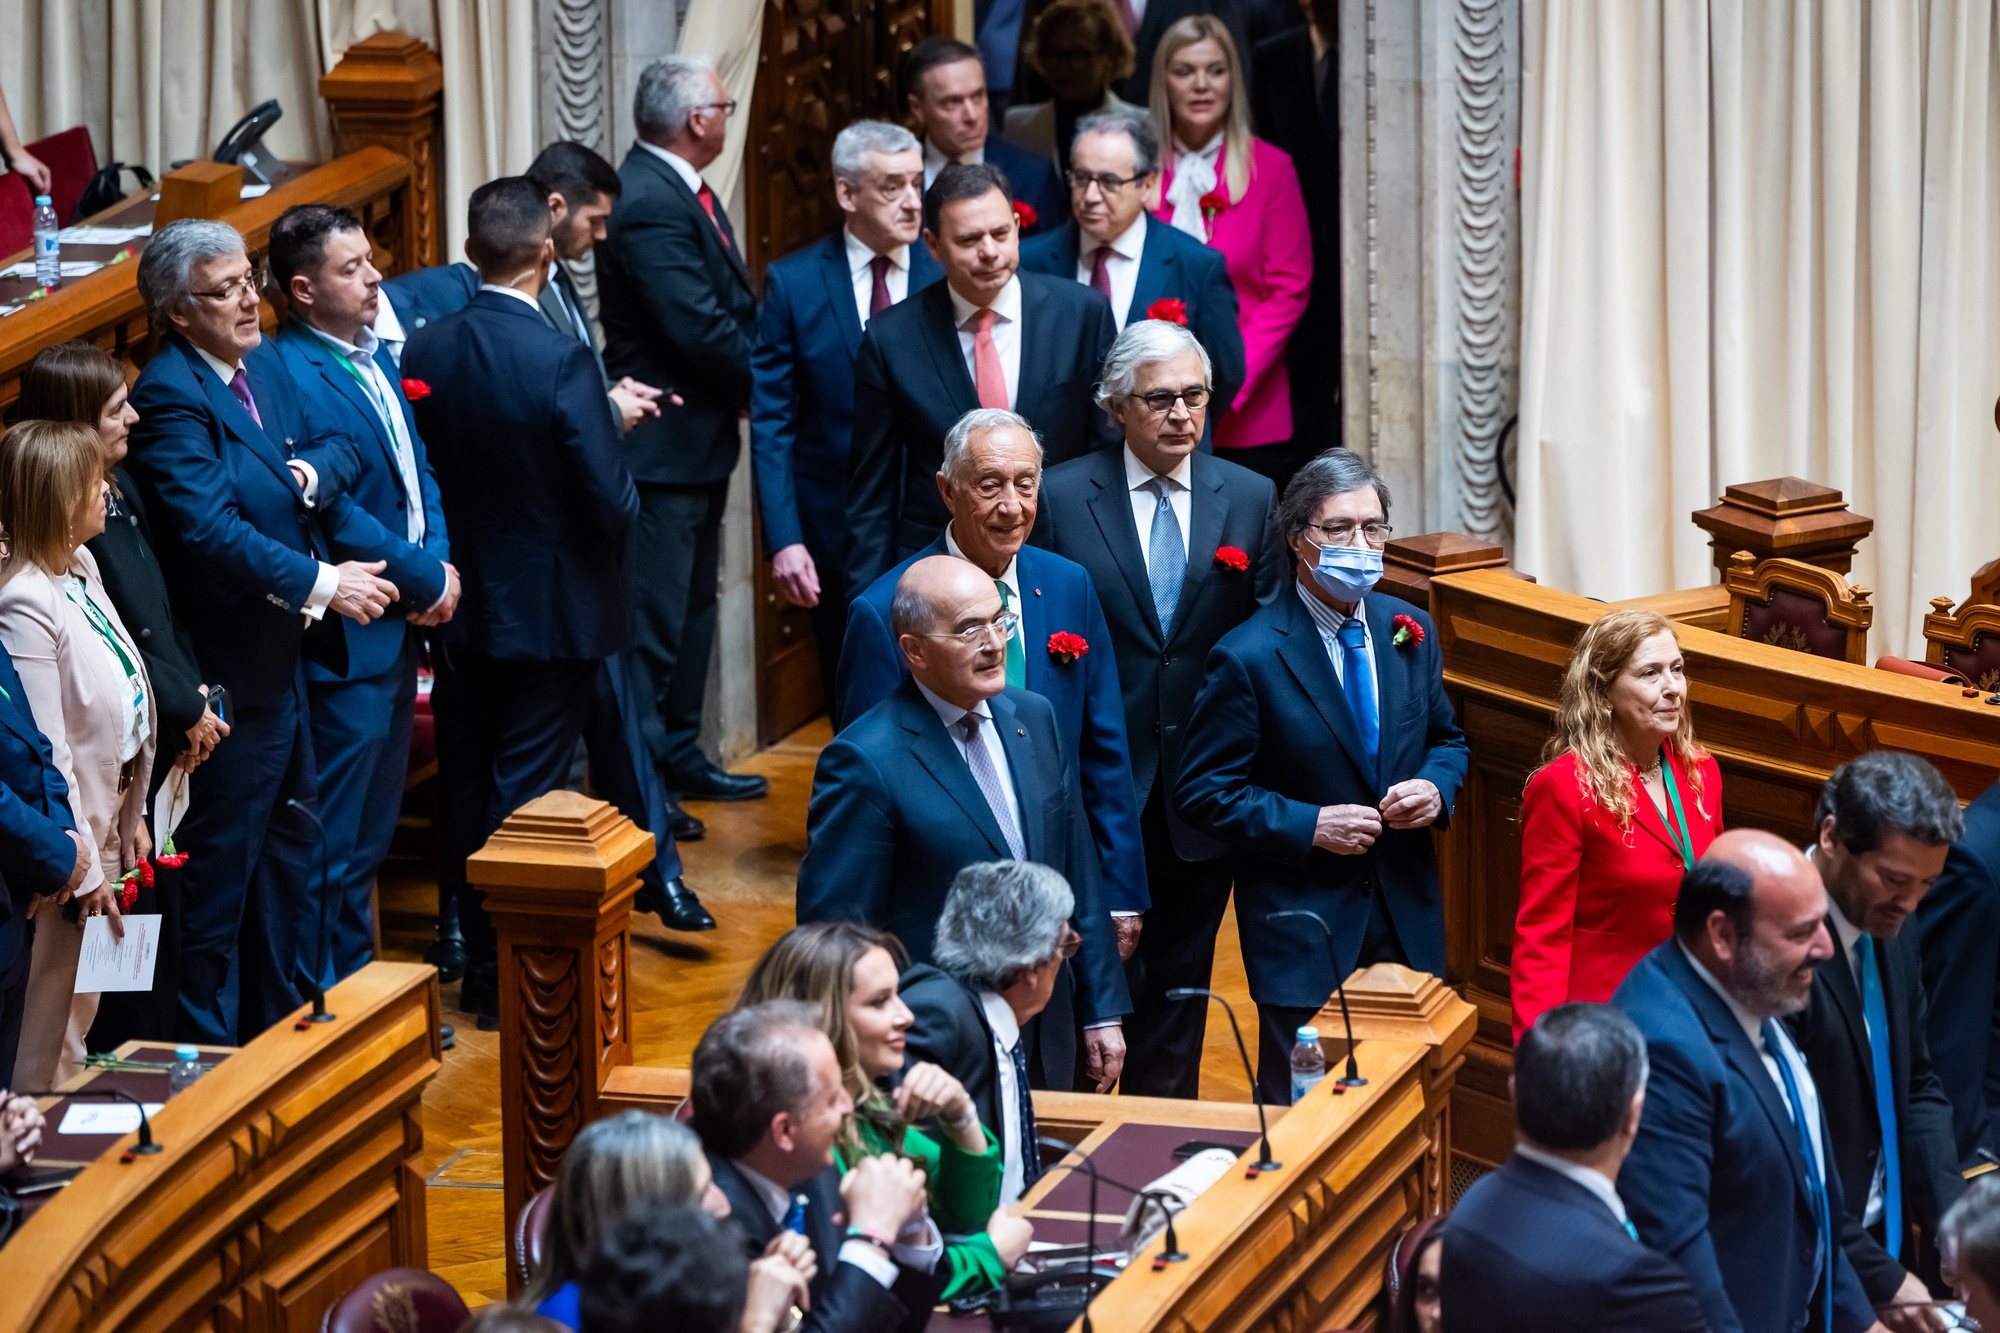 Portuguese Preesident, Marcelo Rebelo de Sousa (C-L), and the Prime Minister, Luis Montenegro (C-R), arrive for the solemn comemorative session at the Portuguese parliament in Lisbon, Portugal, 25 April 2024. Portugal celebrates the 50th anniversary of the Carnation Revolution that ended the authoritarian regime of Estado Novo (New State) that ruled the country between 1926 to 1974. JOSE SENA GOULAO/LUSA